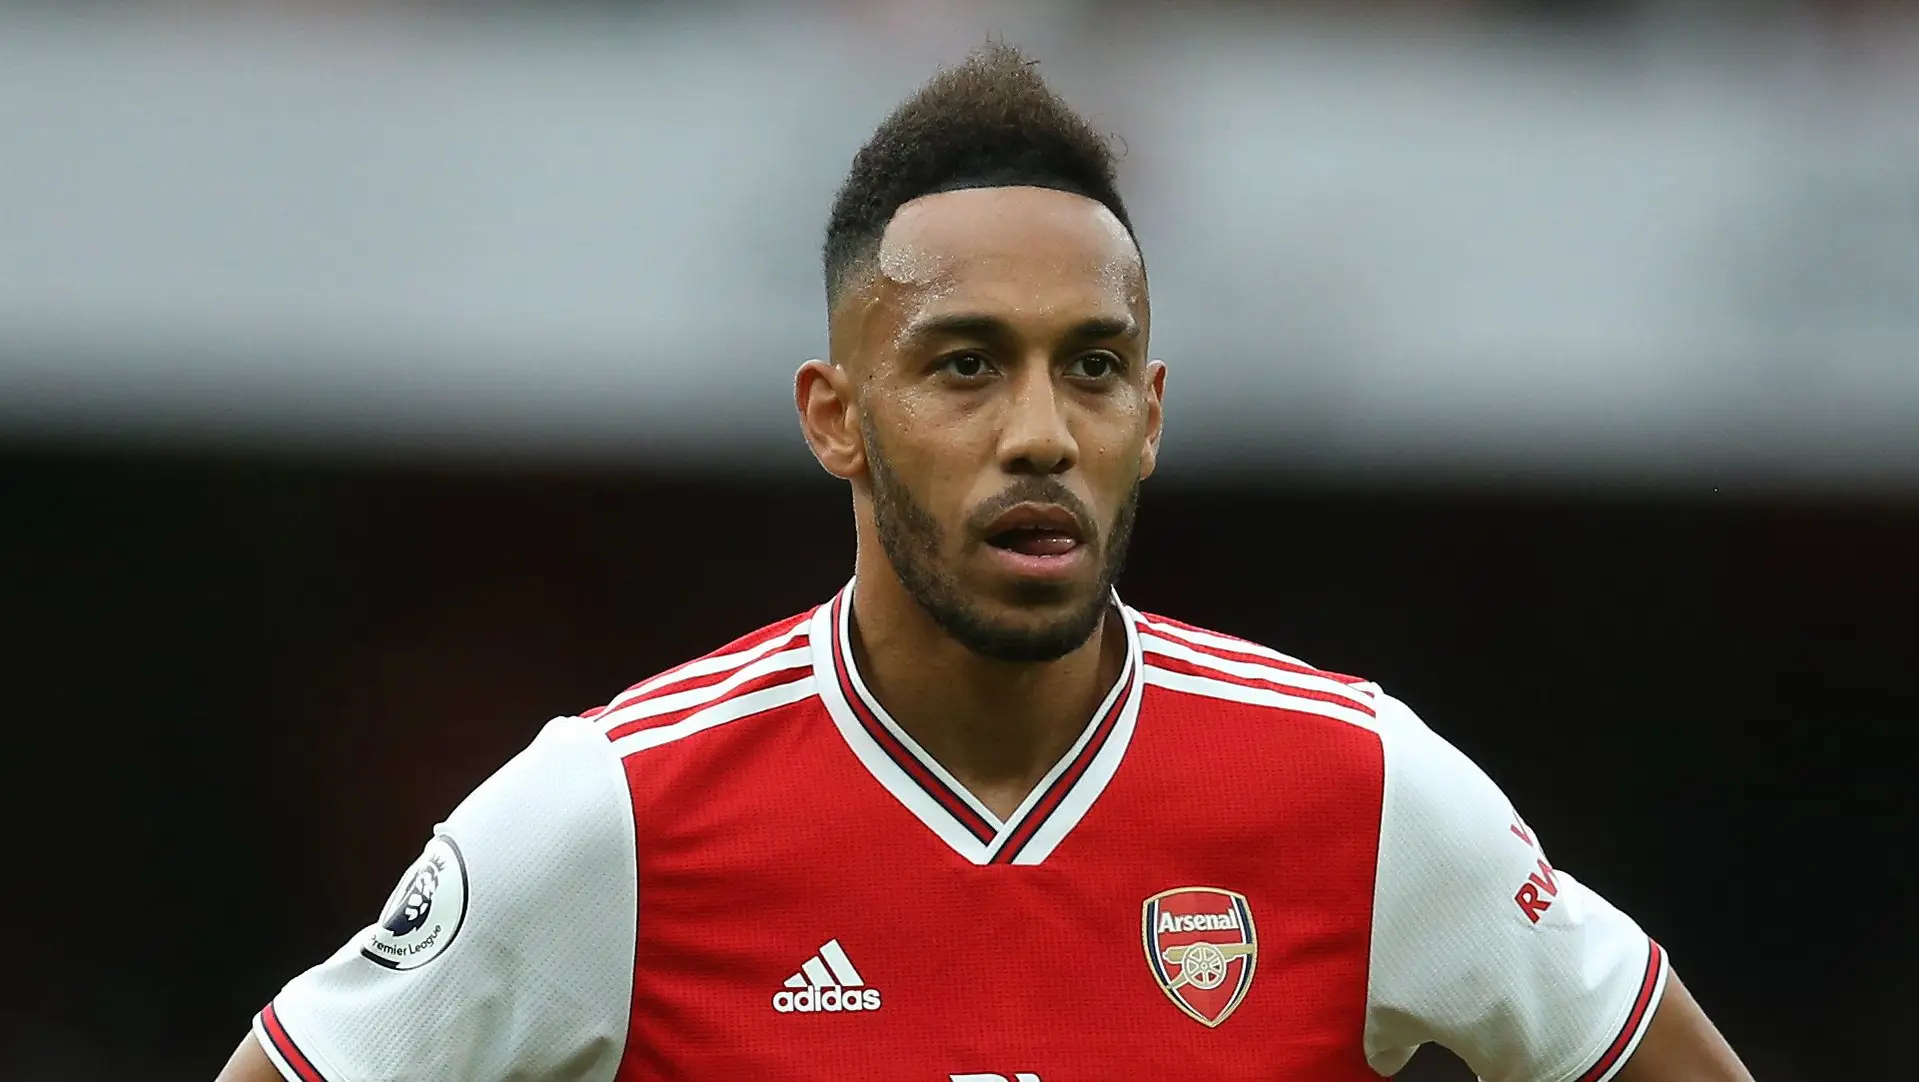 One stat which underlines Auba's massive dip in form this season